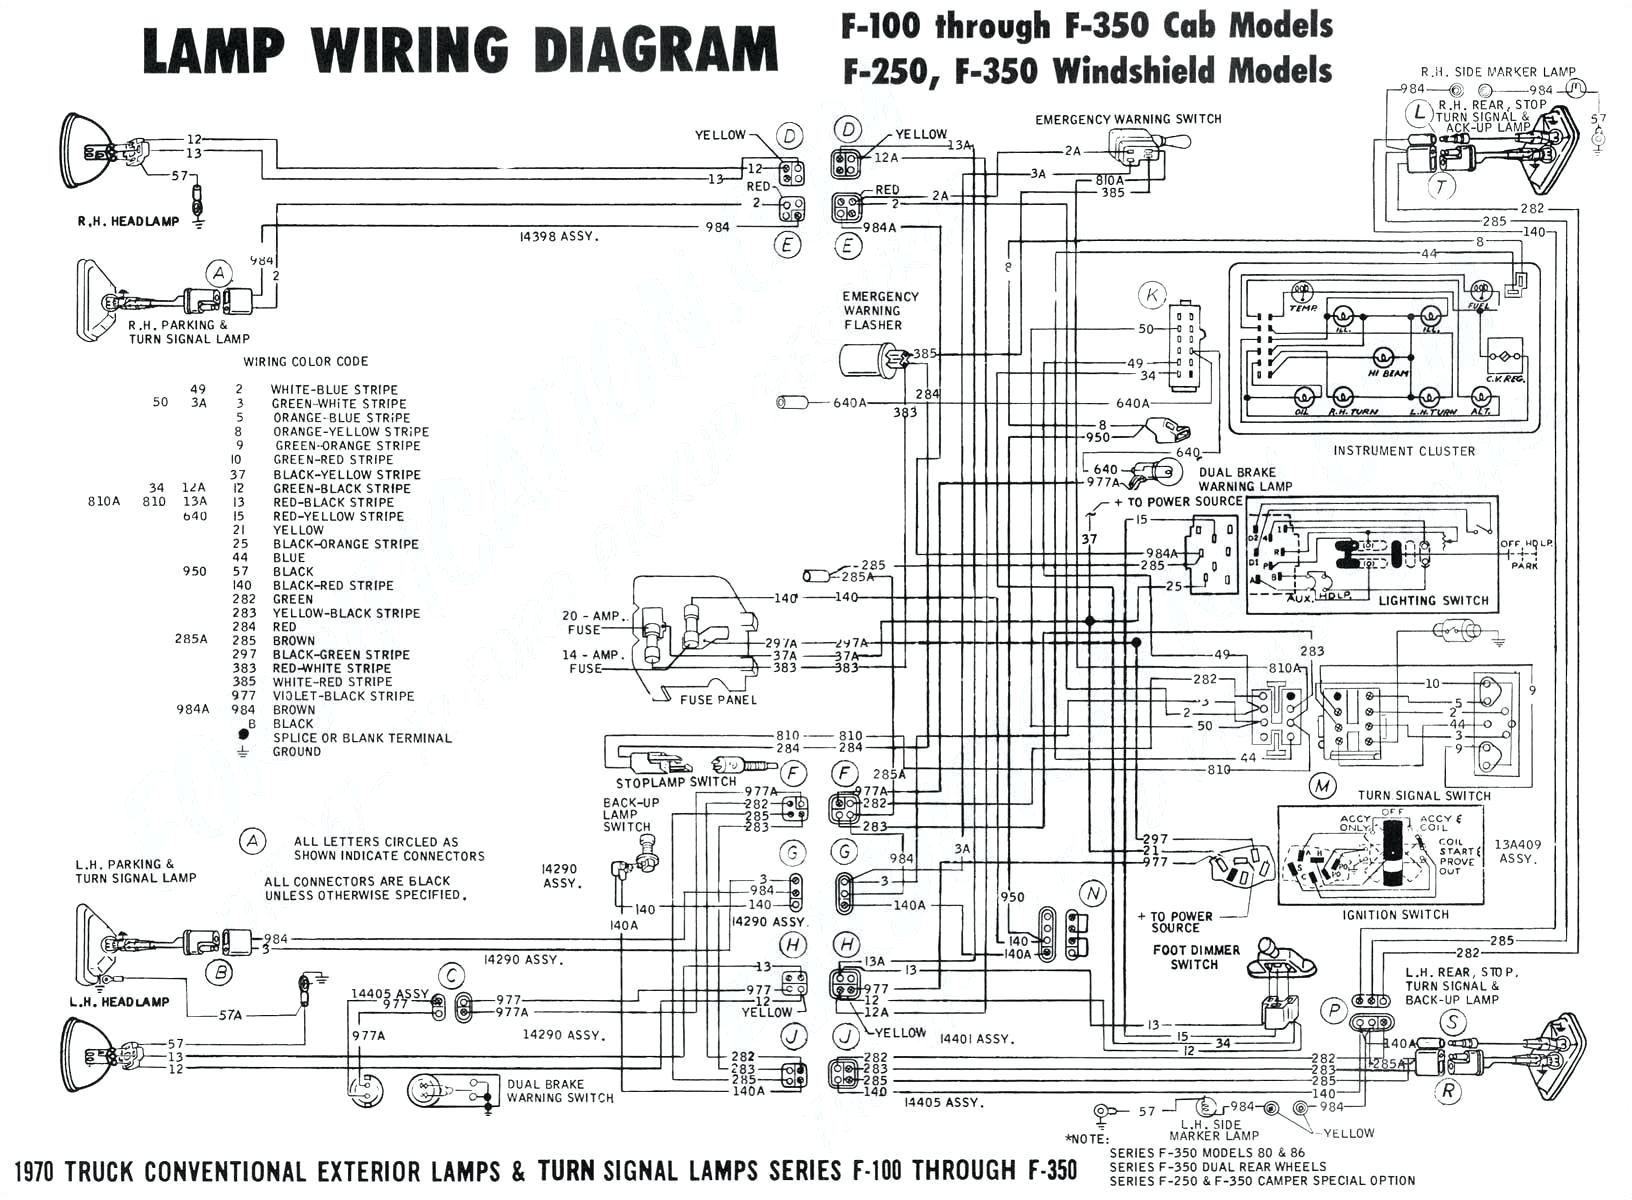 lizard diagram wiring for lights electrical schematic wiring diagram lizard diagram wiring for lights